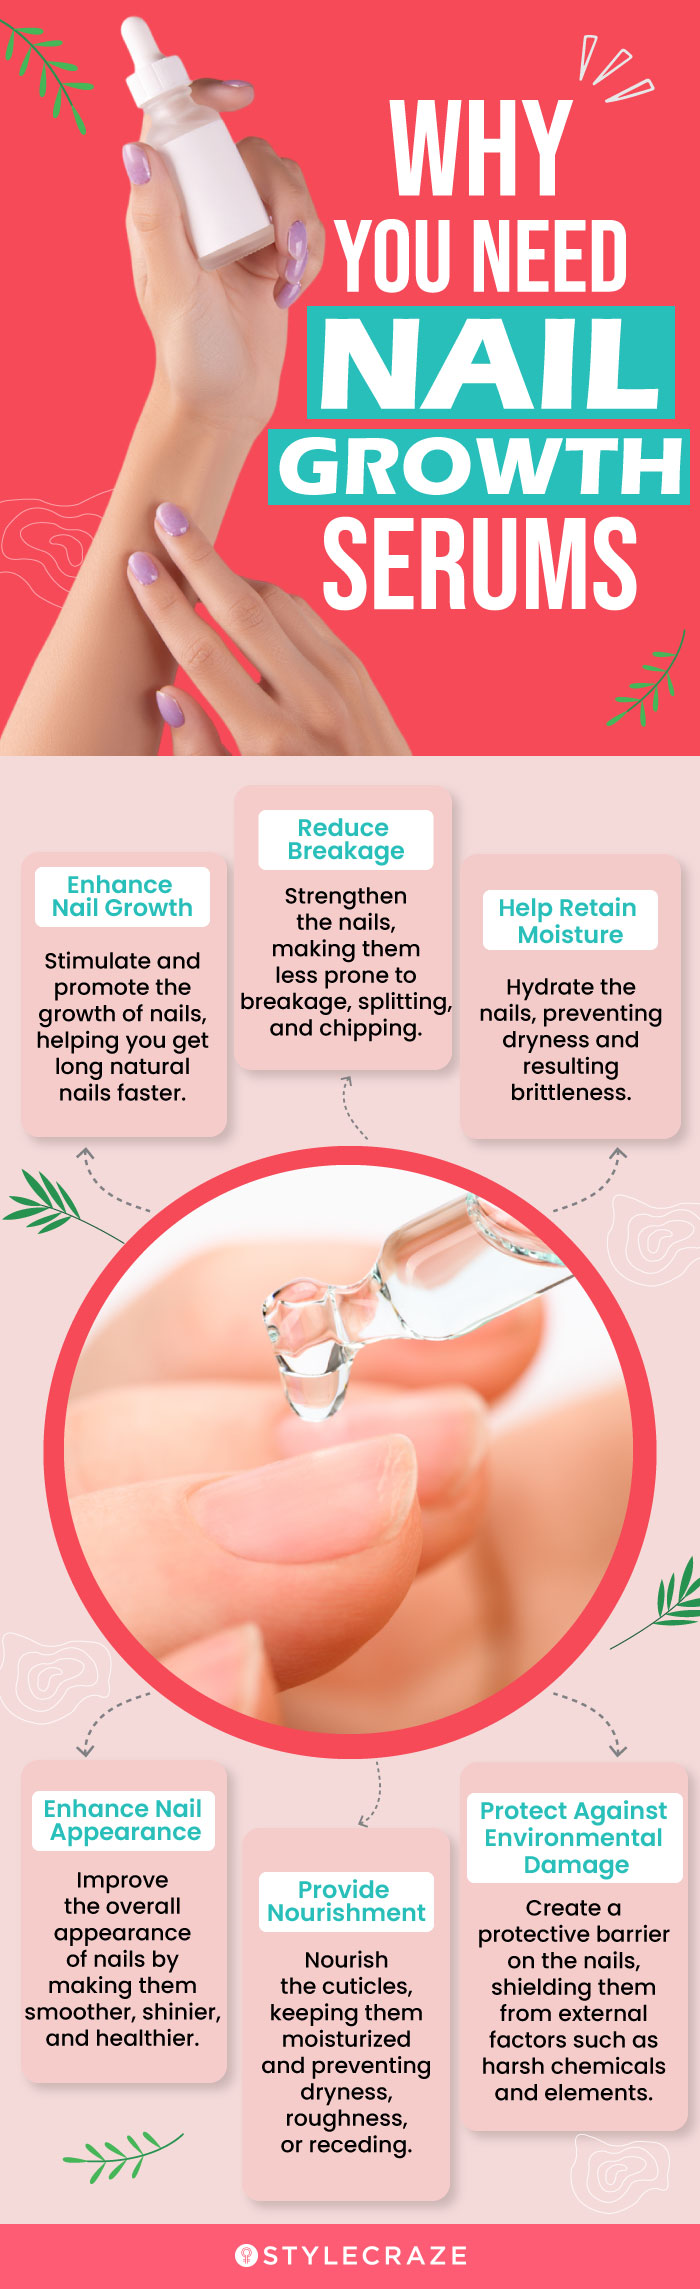 Why You Need Nail Growth Serums (infographic)